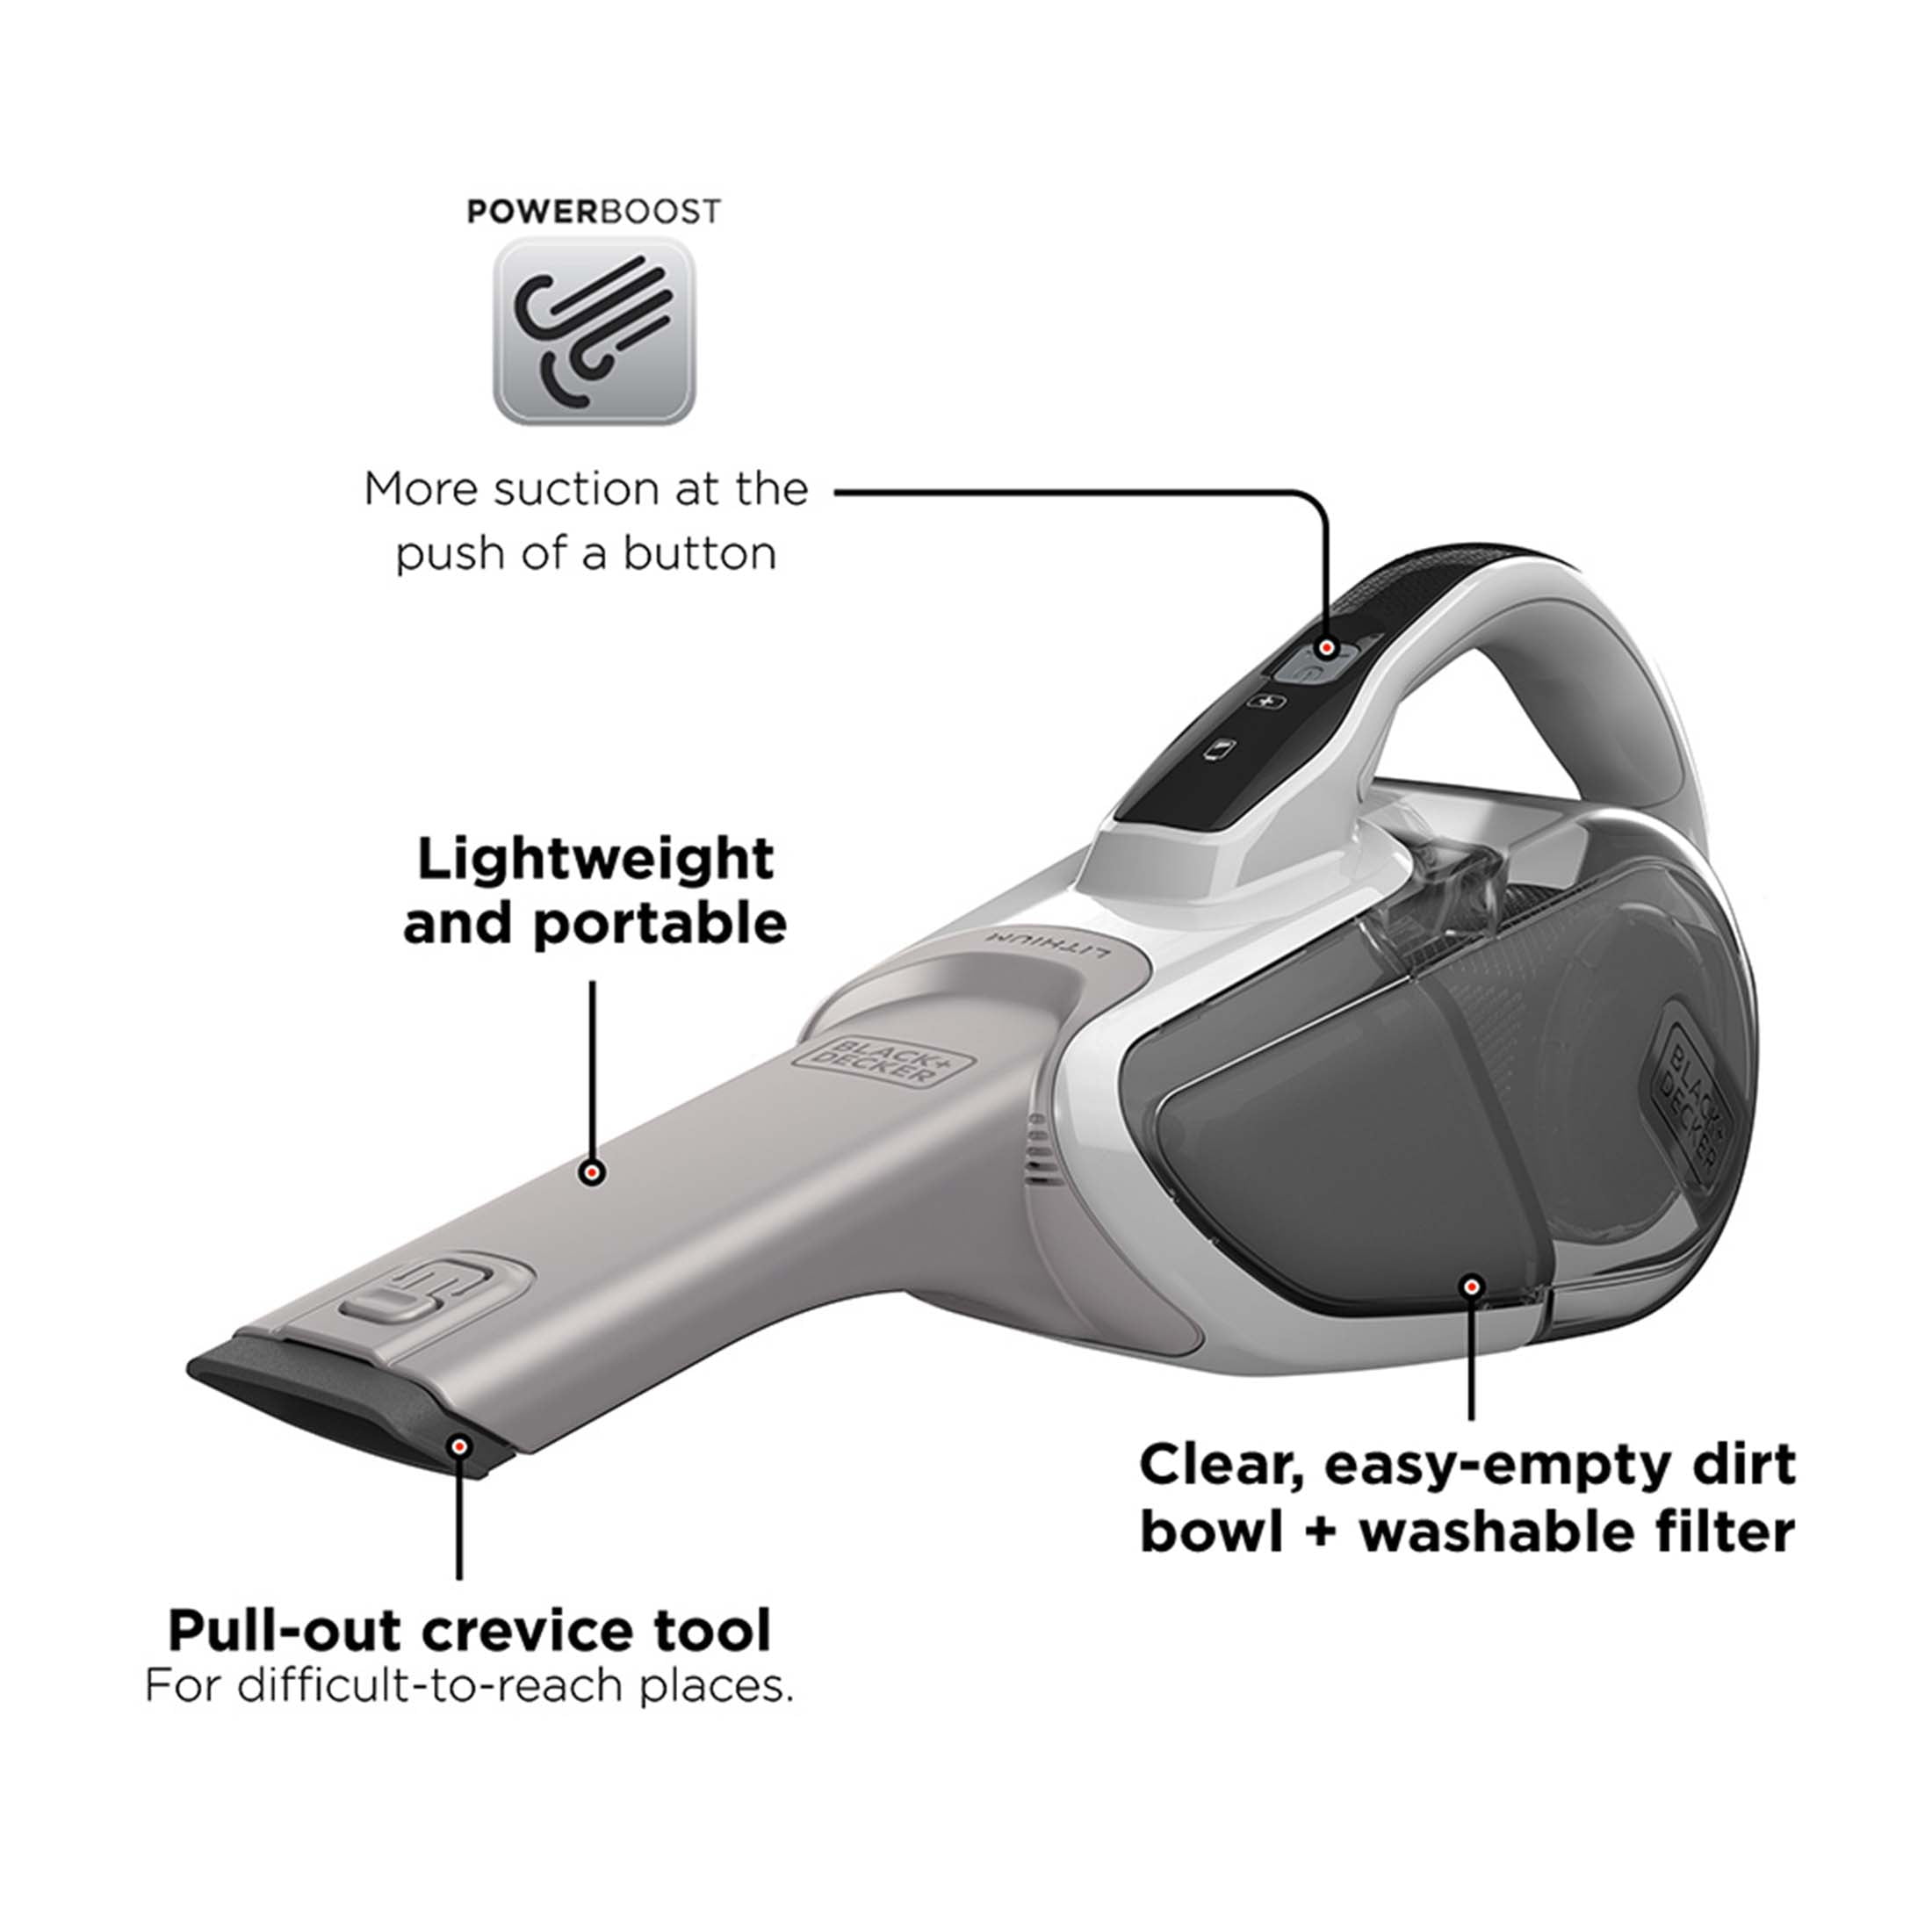 Black + Decker DV7210N Cyclonic Action Dustbuster Hand Vacuum – 220 volt  not for usa.